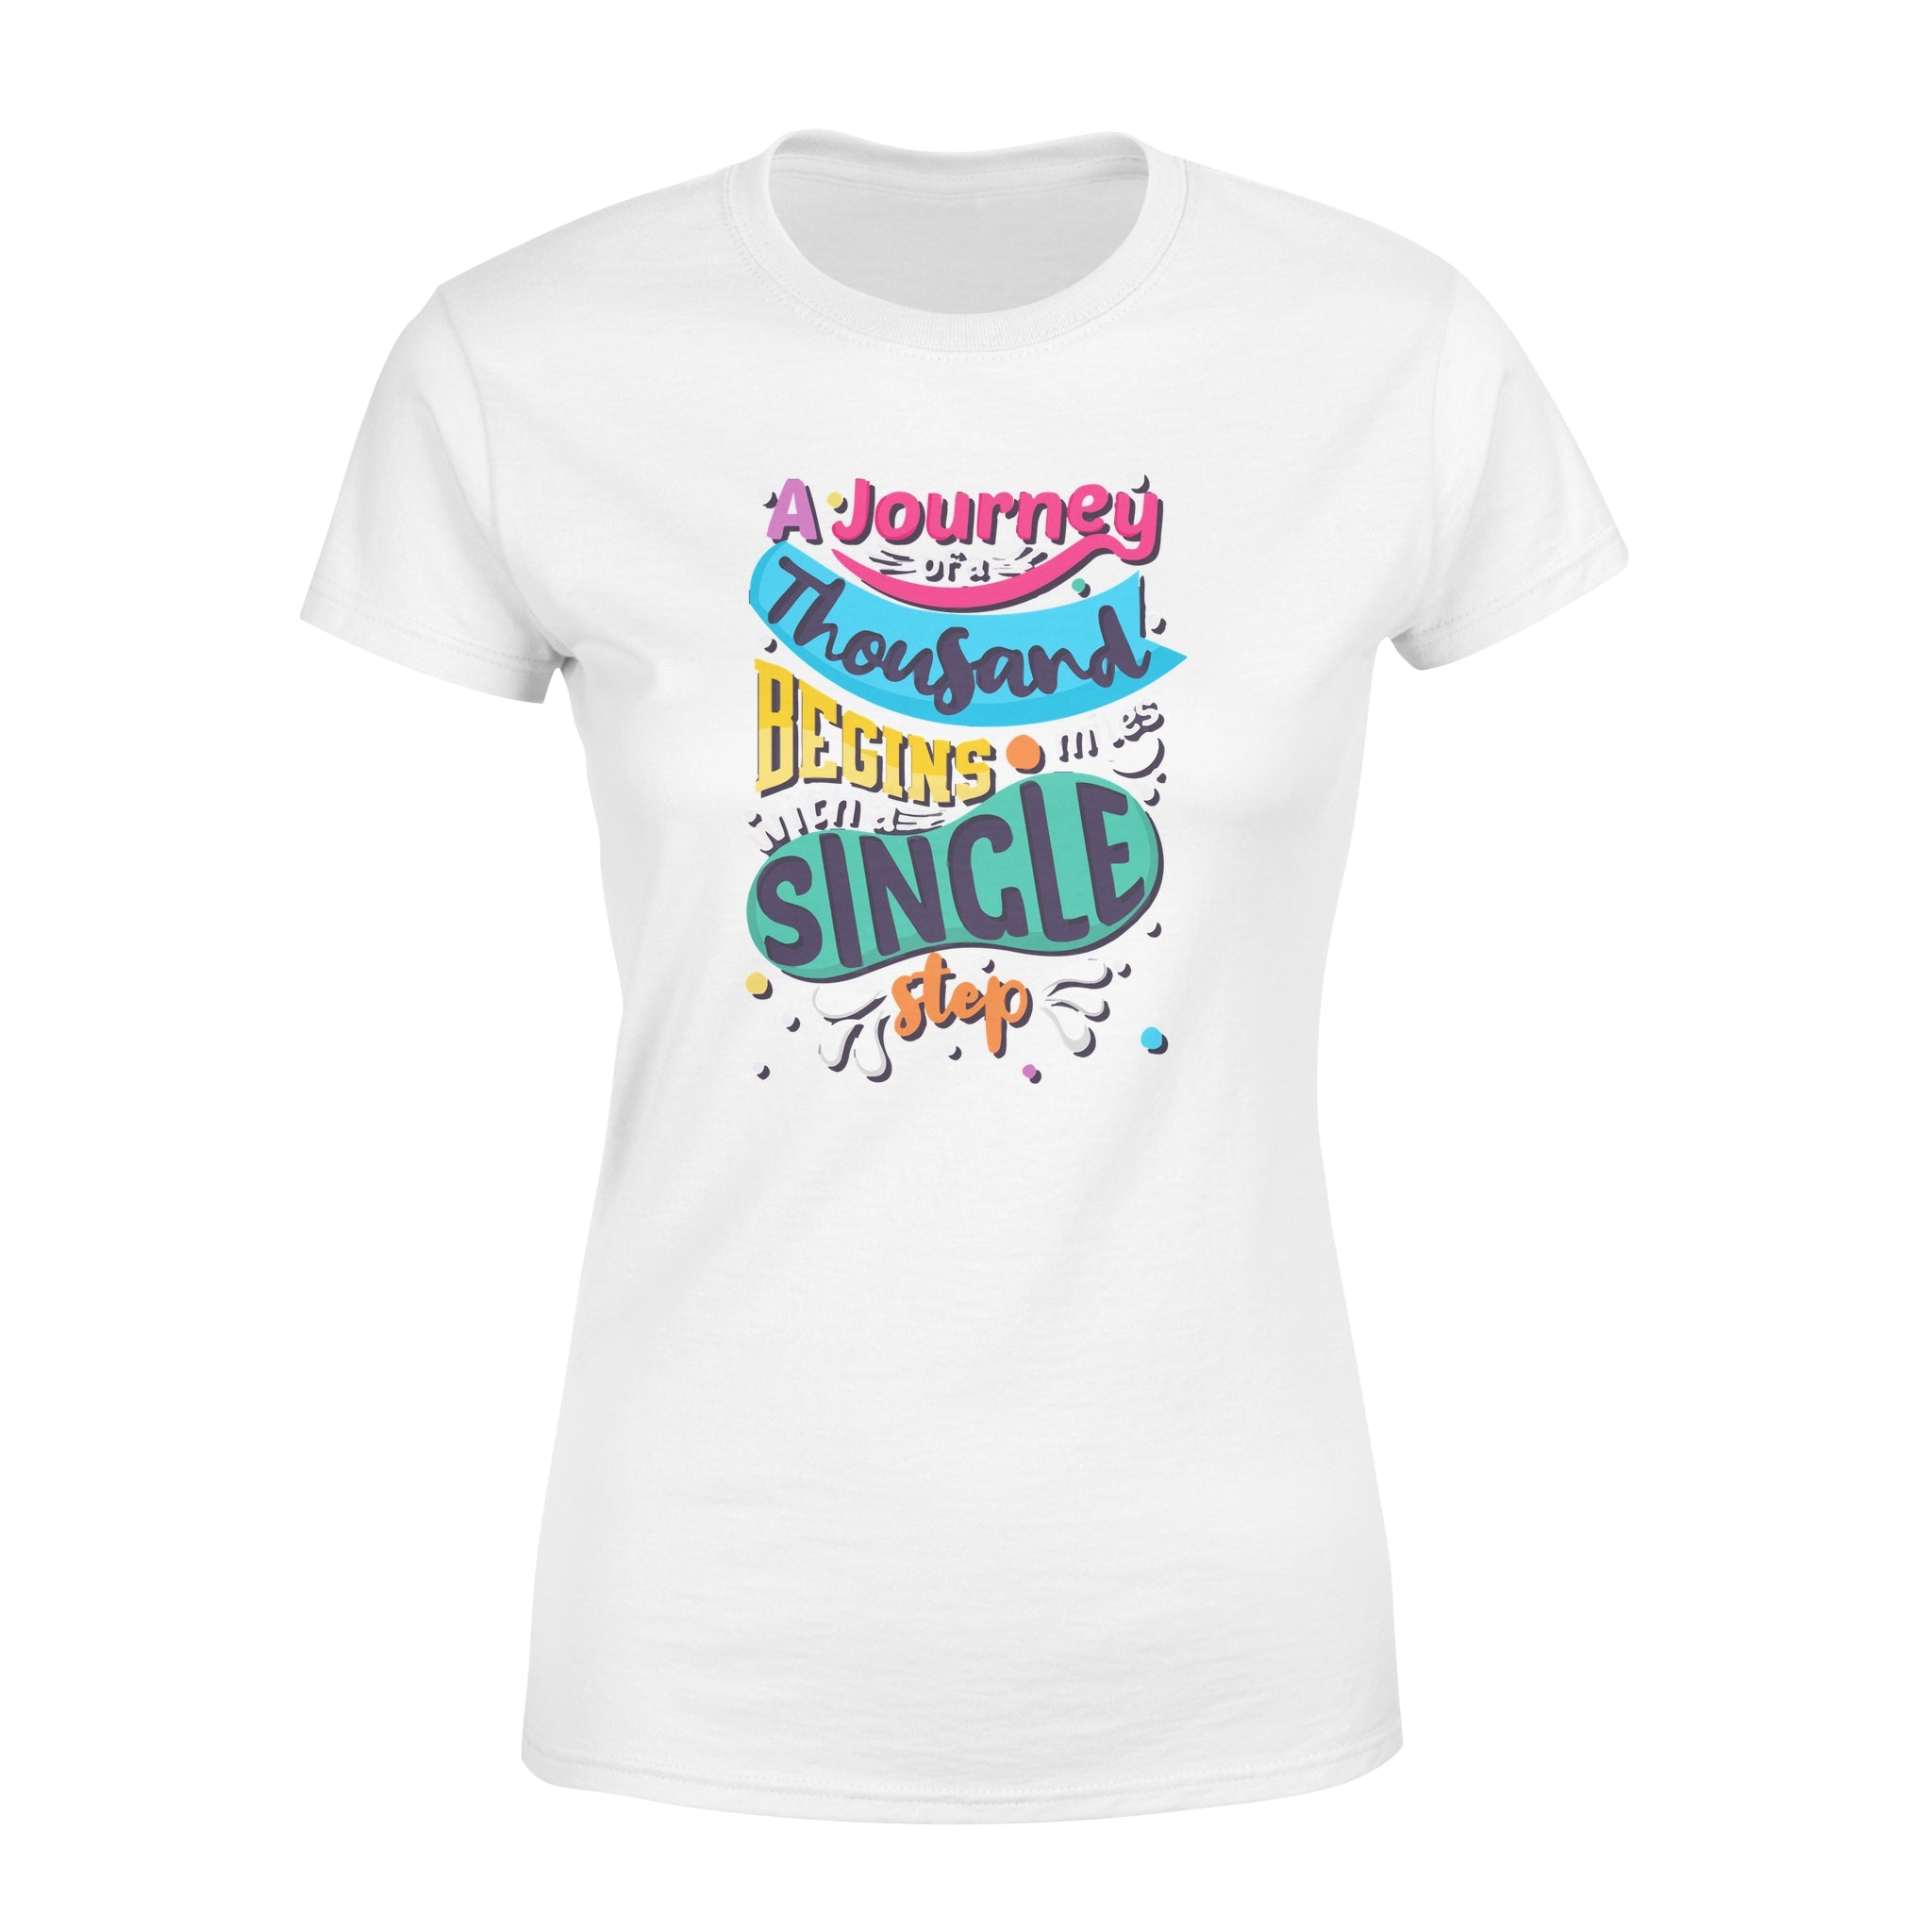 Aj Journey of a Thousand Miles Begins with a Single Step - Women's T-shirt